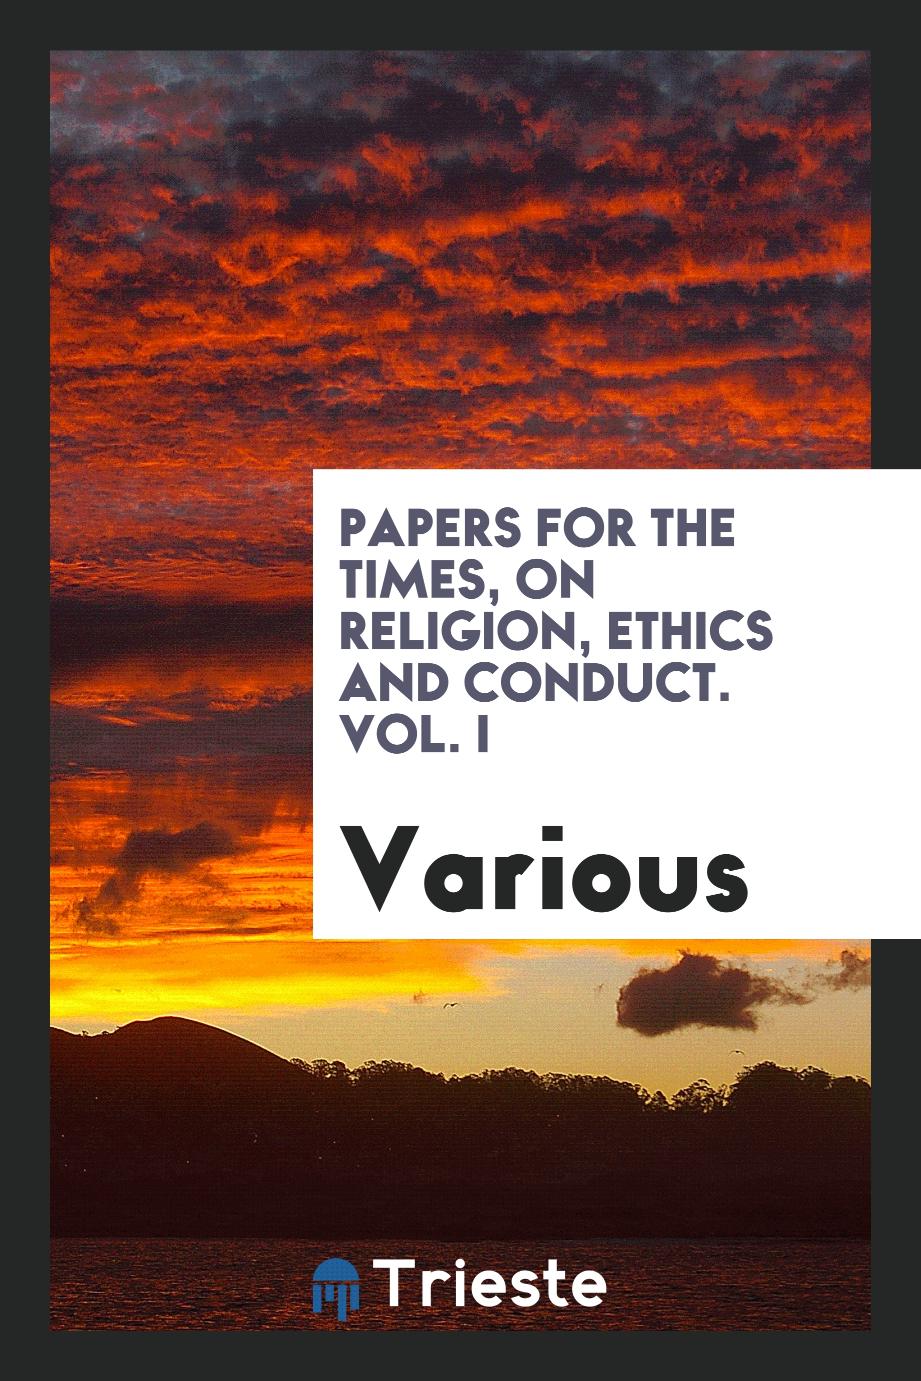 Papers for the Times, on Religion, Ethics and Conduct. Vol. I